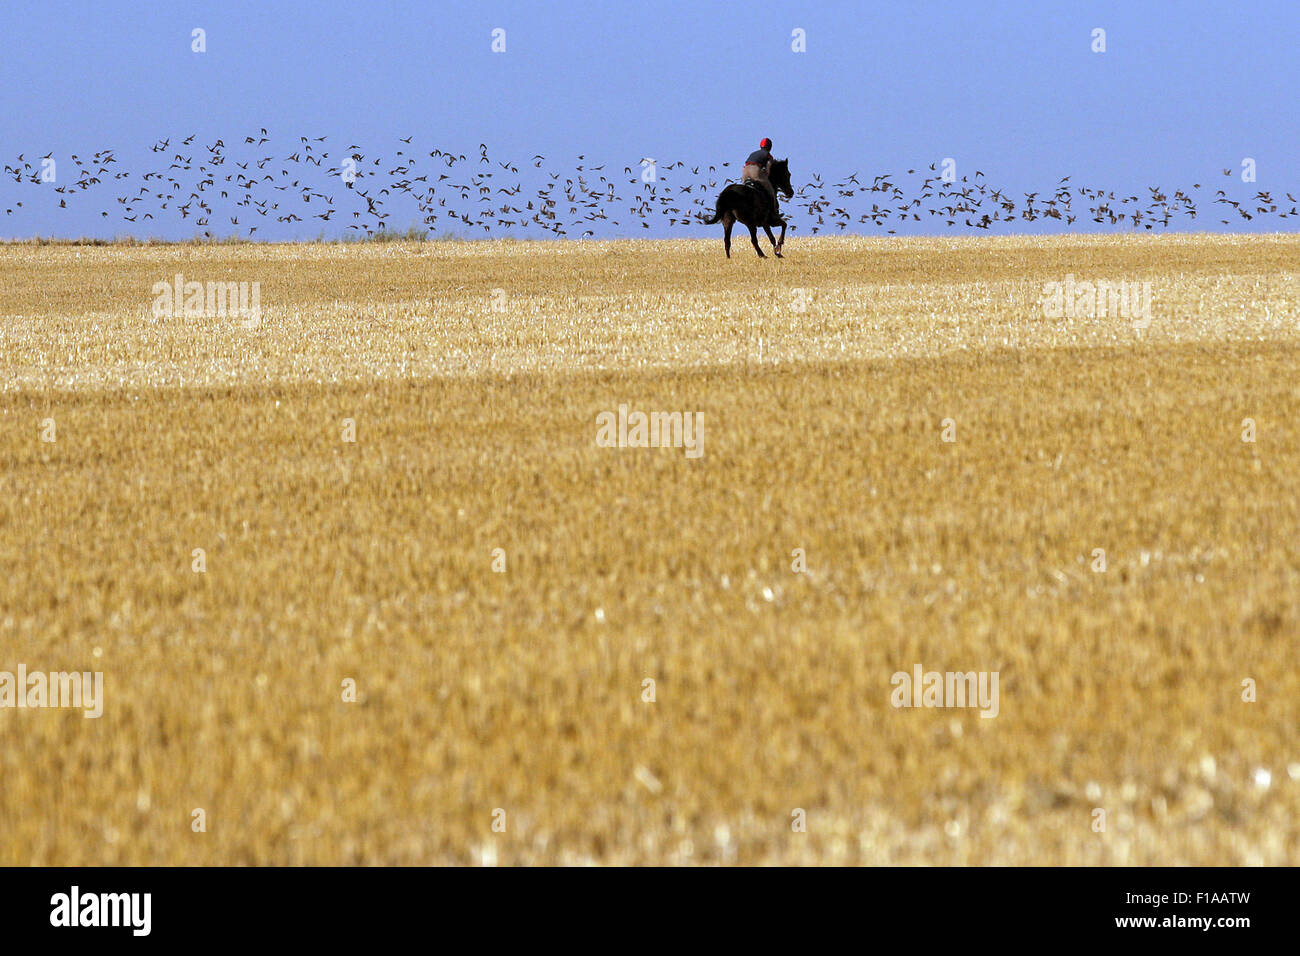 Ingelheim, Germany, boy rides on his horse galloping over a mown field Stock Photo